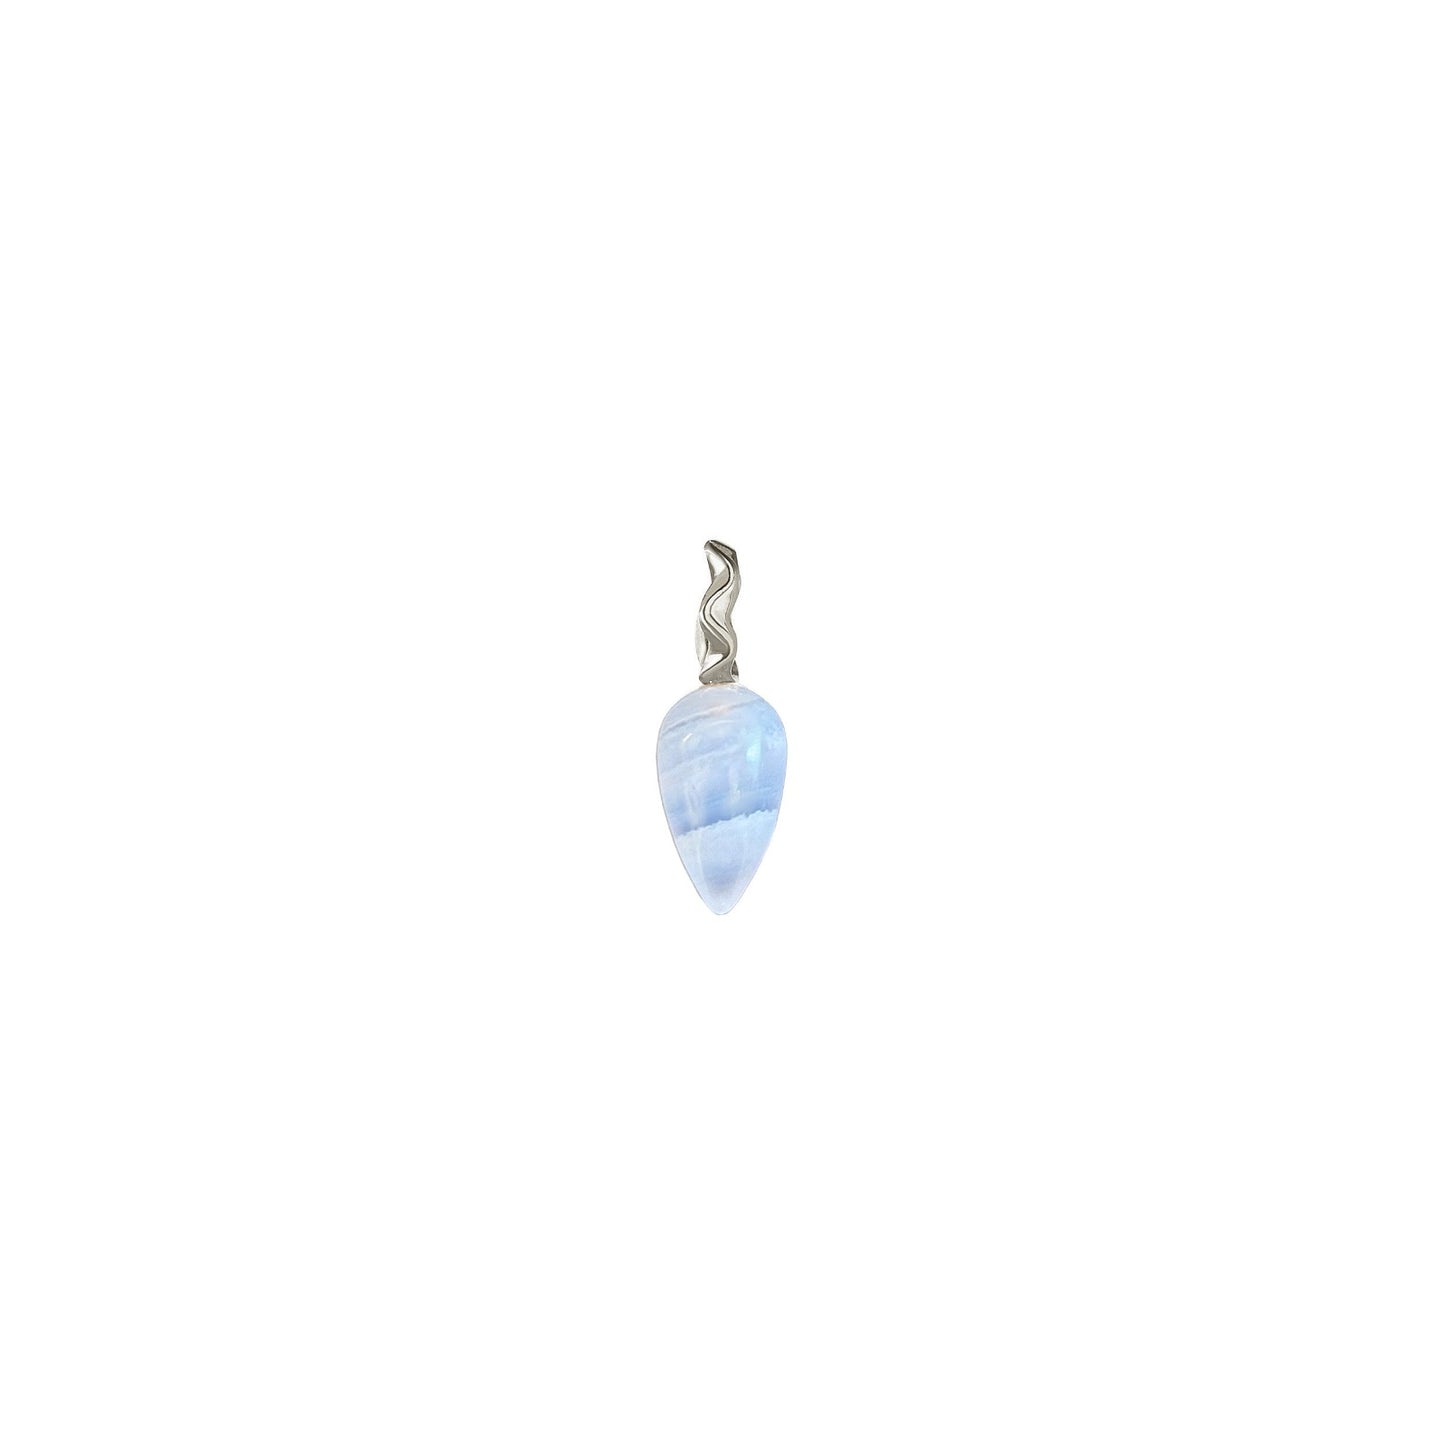 Blue lace agate acorn drop charm with 14k white gold bail